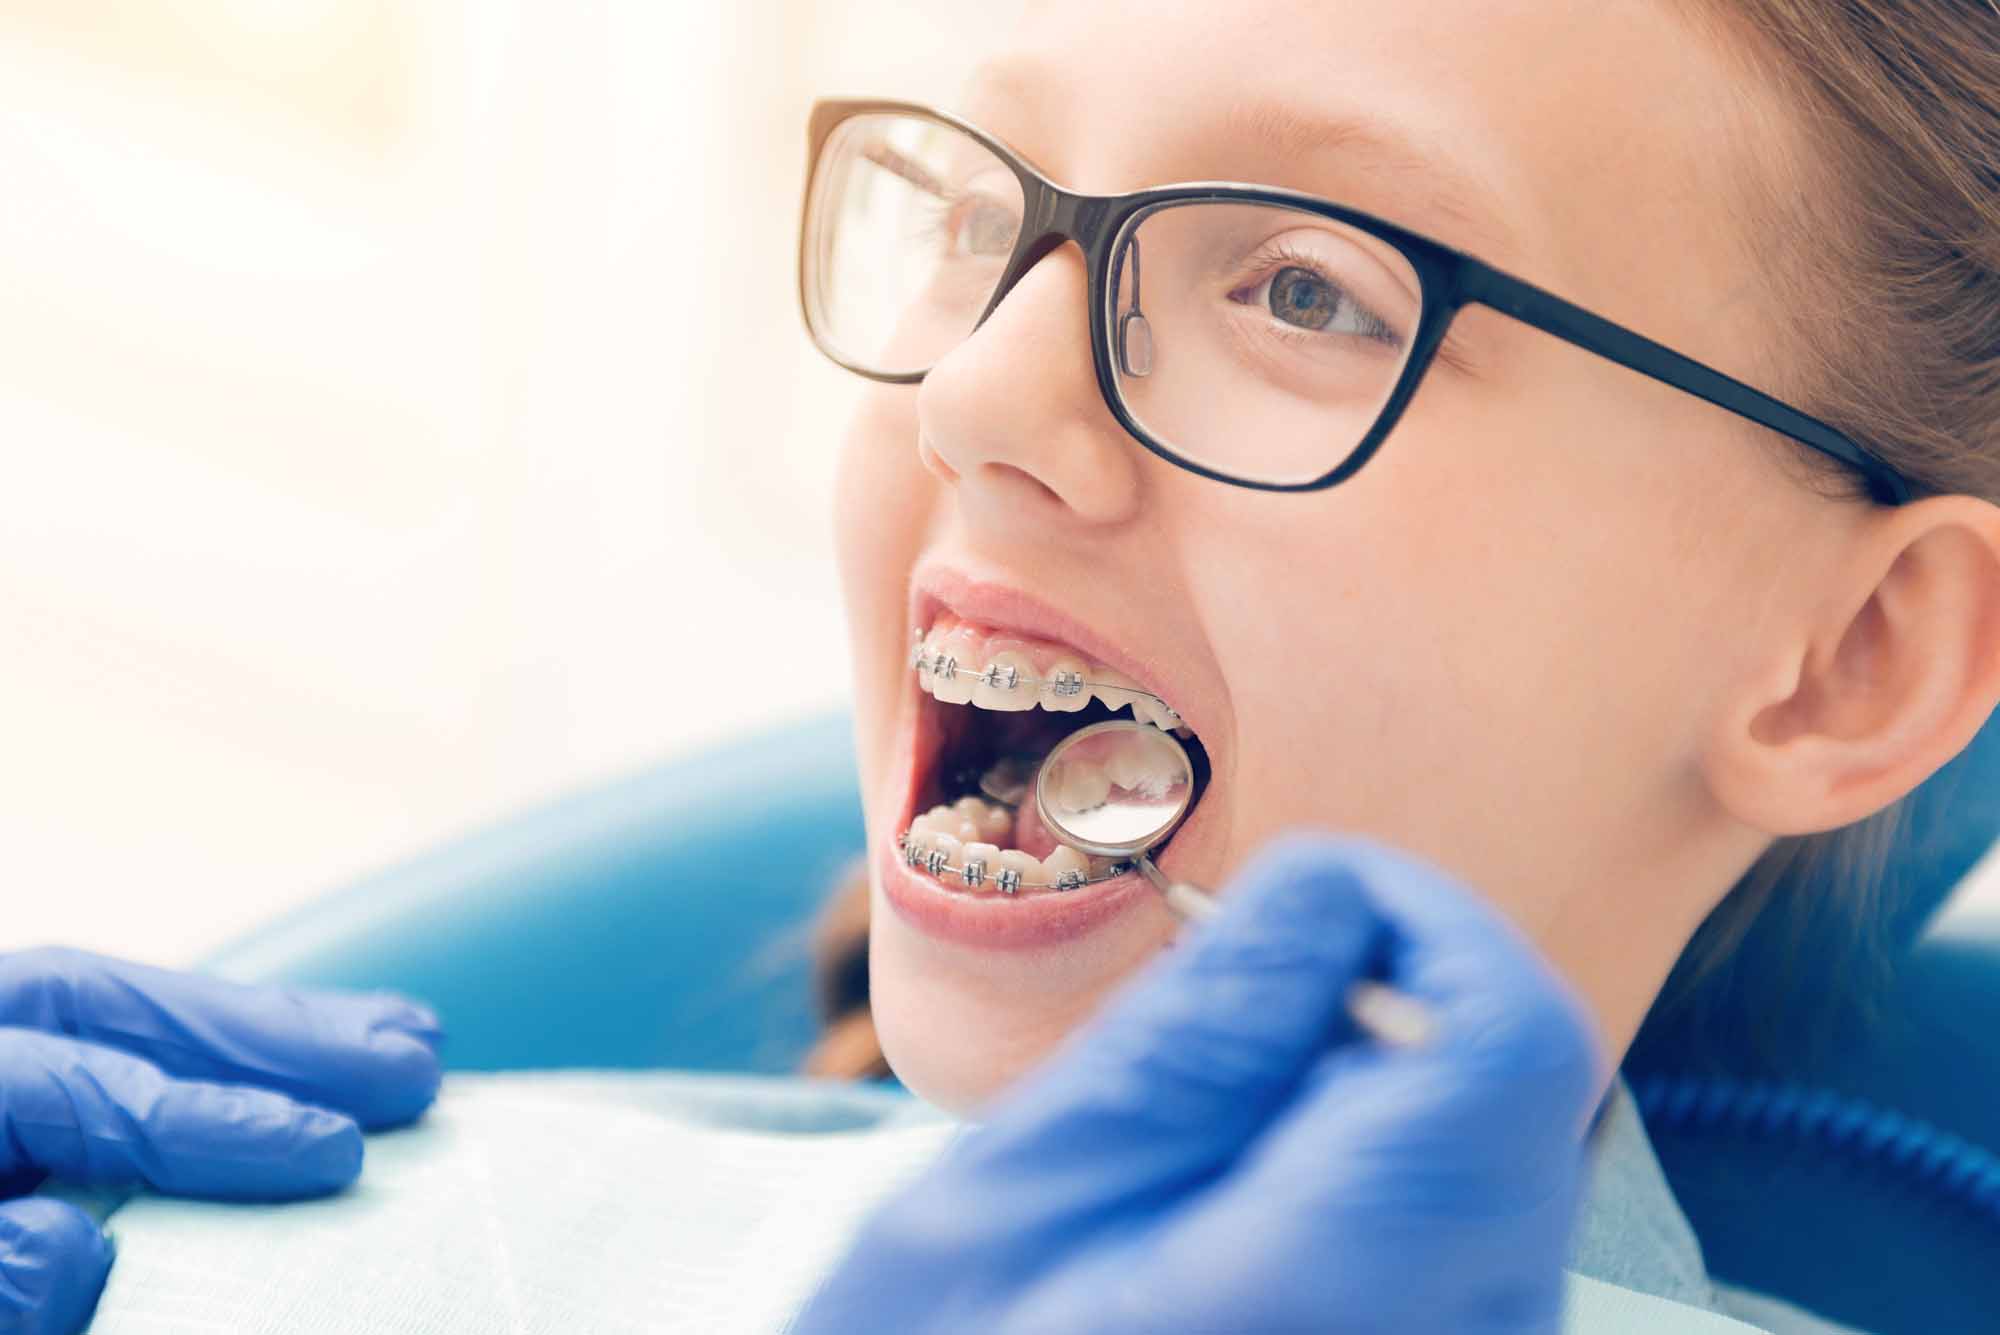 Young girl with braces getting treated by a dentist - Smart Pediatric Dentistry, Utah